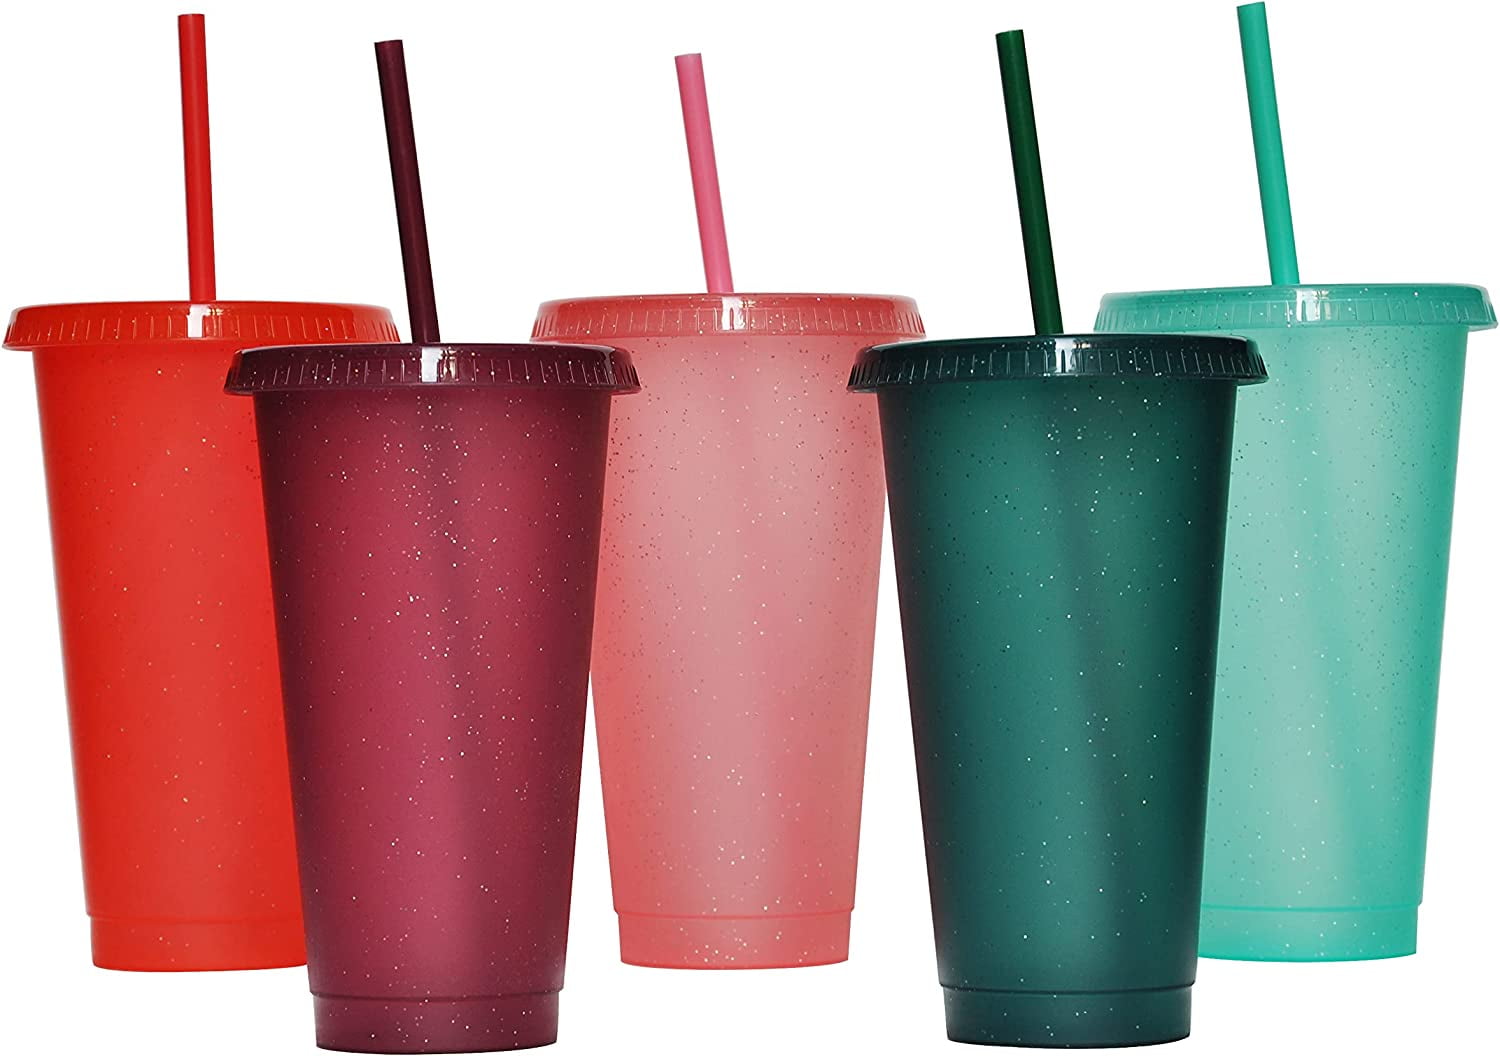 5 Glitter Cup 24oz Reu Tumblers With Lids And Straws,water Bottle Iced  Coffee Travel Cup Cold Drink Cup Smoothie Cup,reu Plastic Cups,perfect For  Part